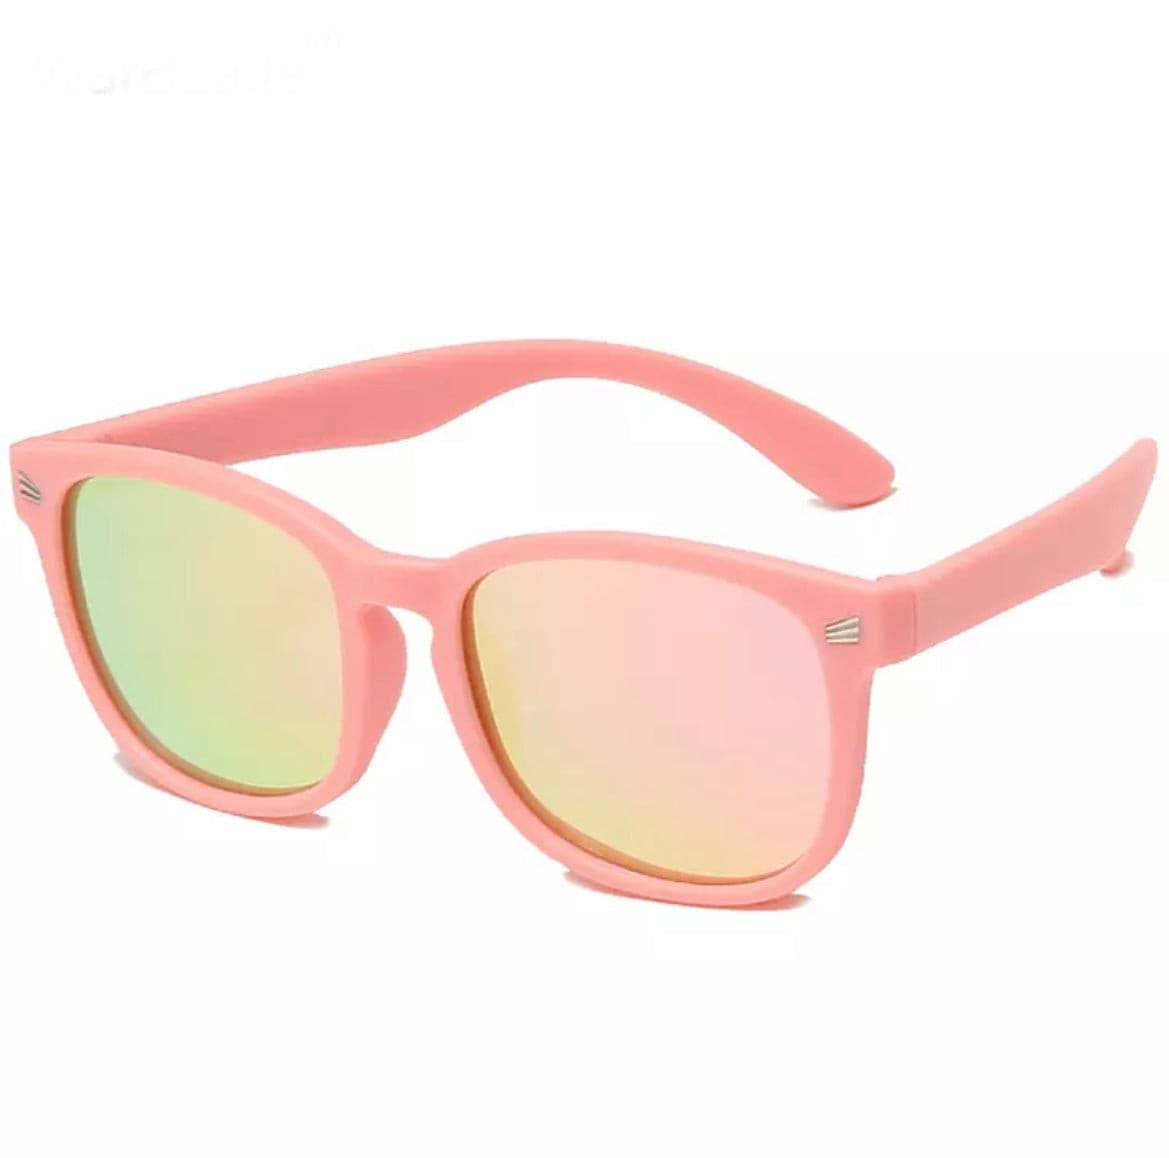 Ultra Flexible Polarised Sunglasses - Pink with Pink Yellow Mirror.